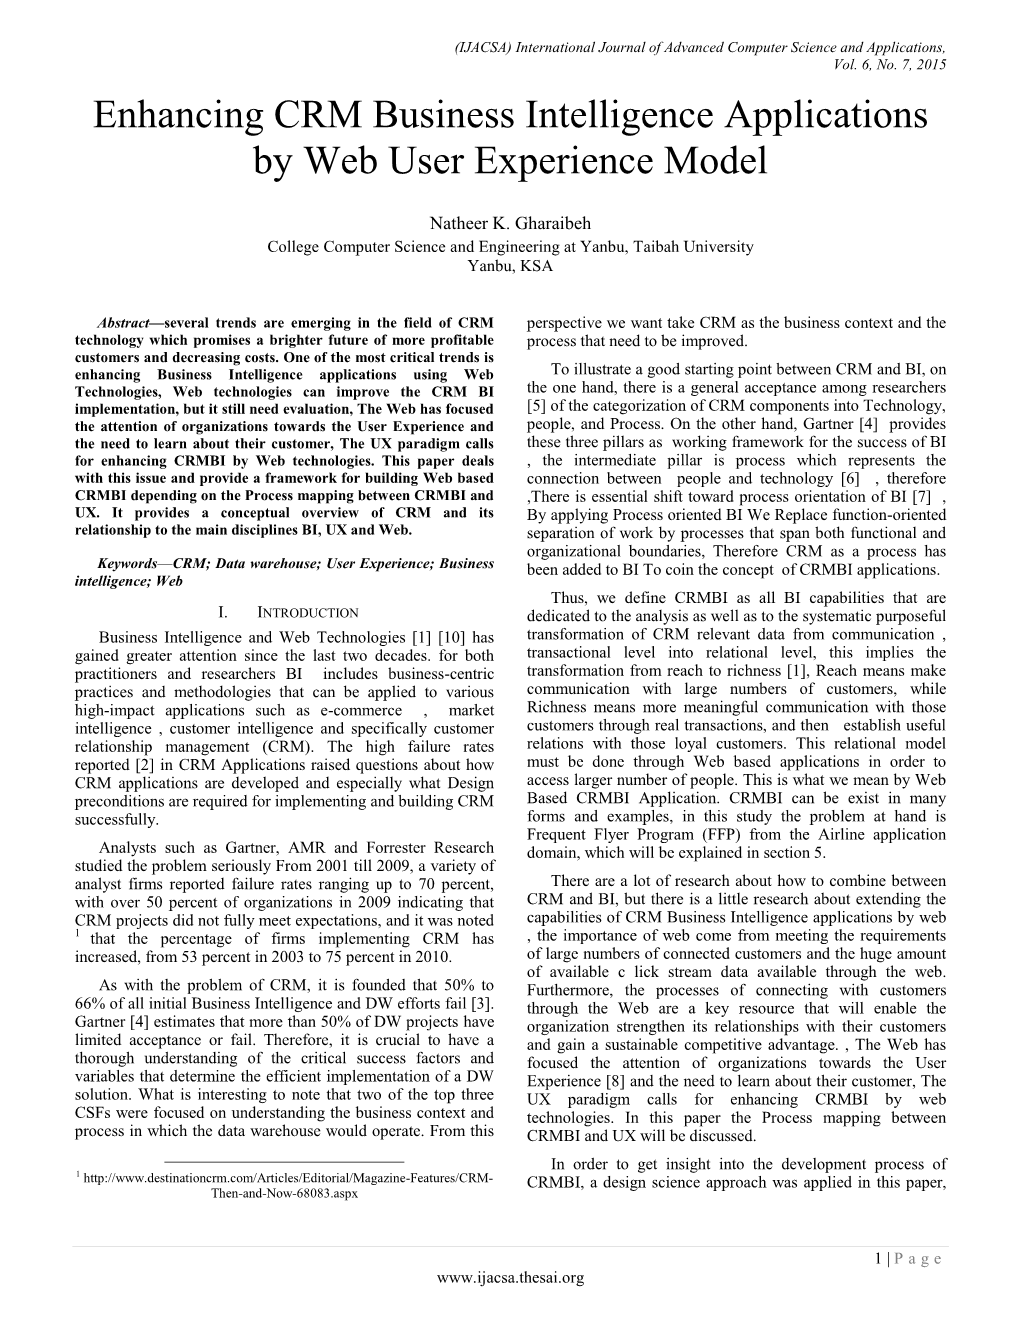 Enhancing CRM Business Intelligence Applications by Web User Experience Model